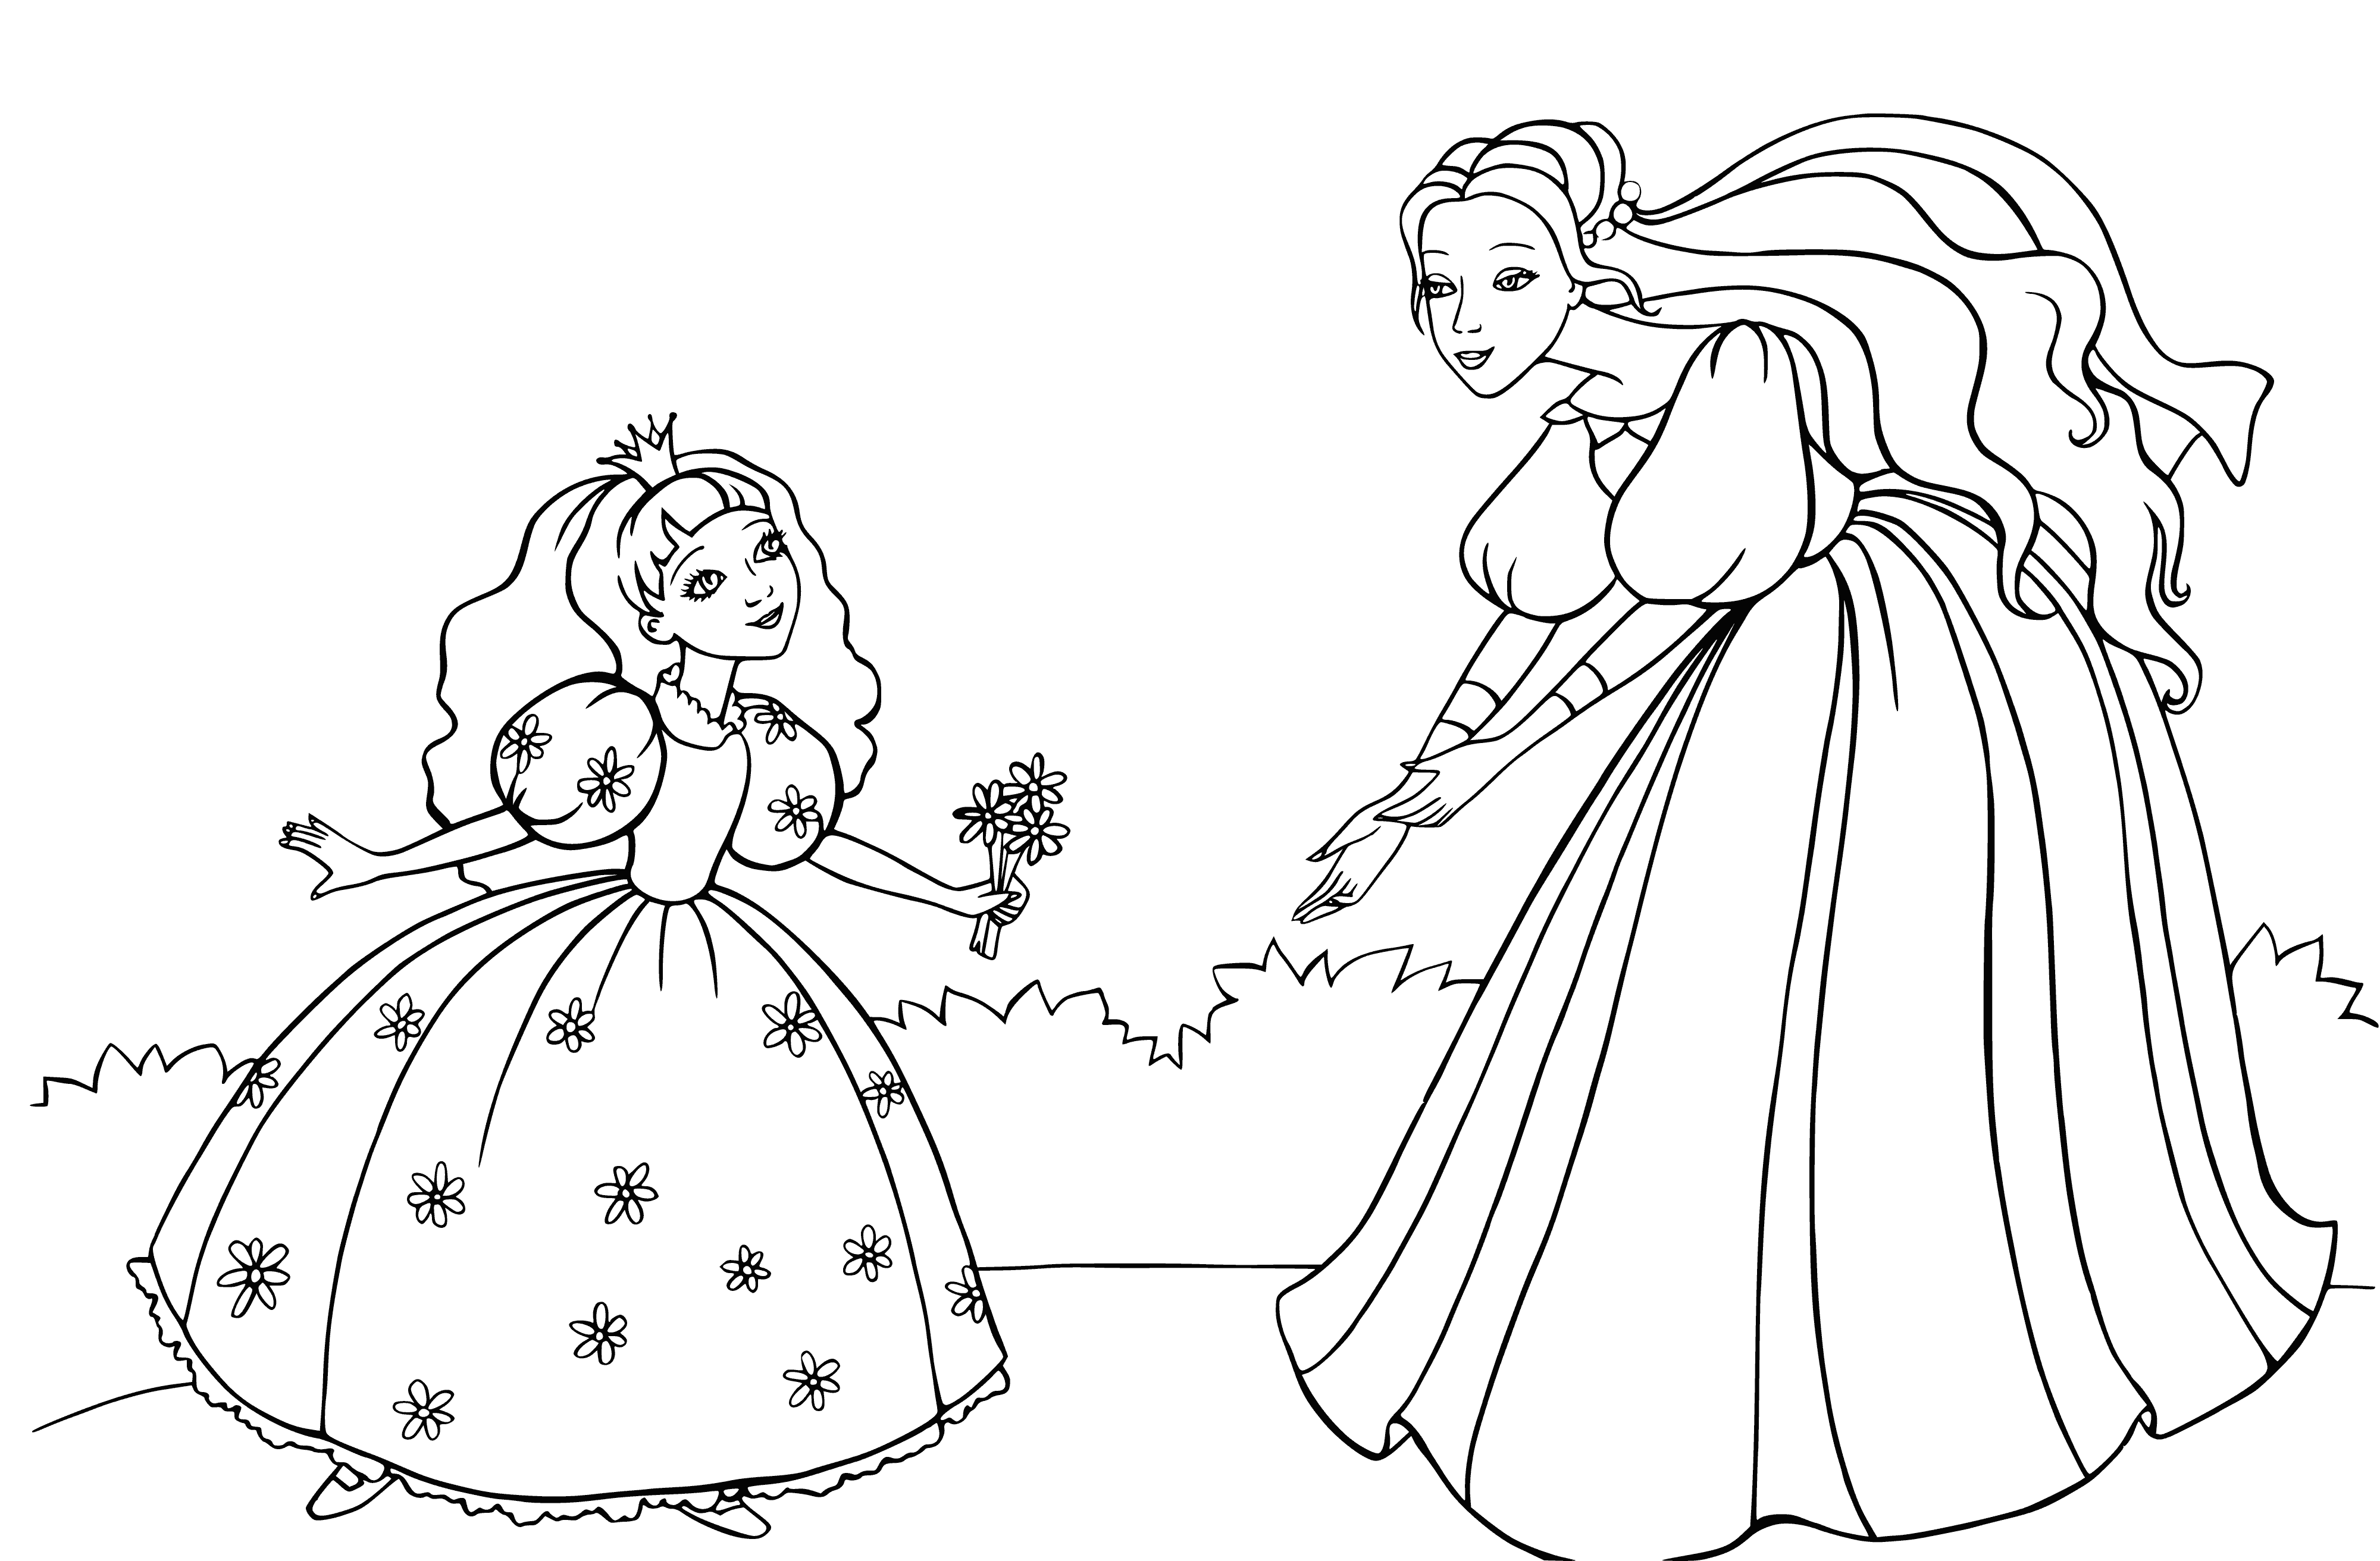 coloring page: Beautiful Princess sits on a throne of flowers with wand in hand surrounded by a magical castle and nature.